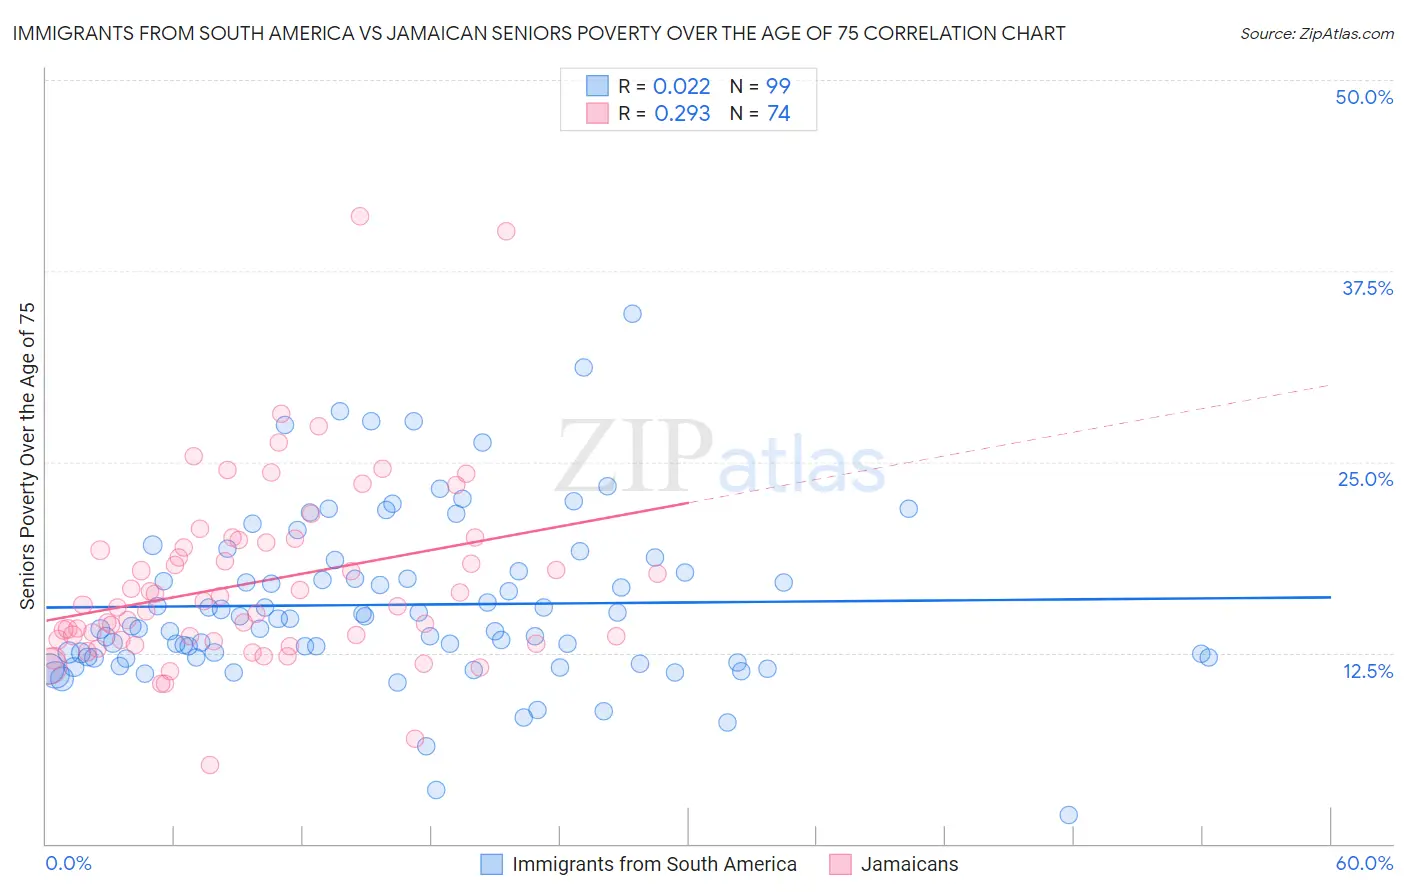 Immigrants from South America vs Jamaican Seniors Poverty Over the Age of 75